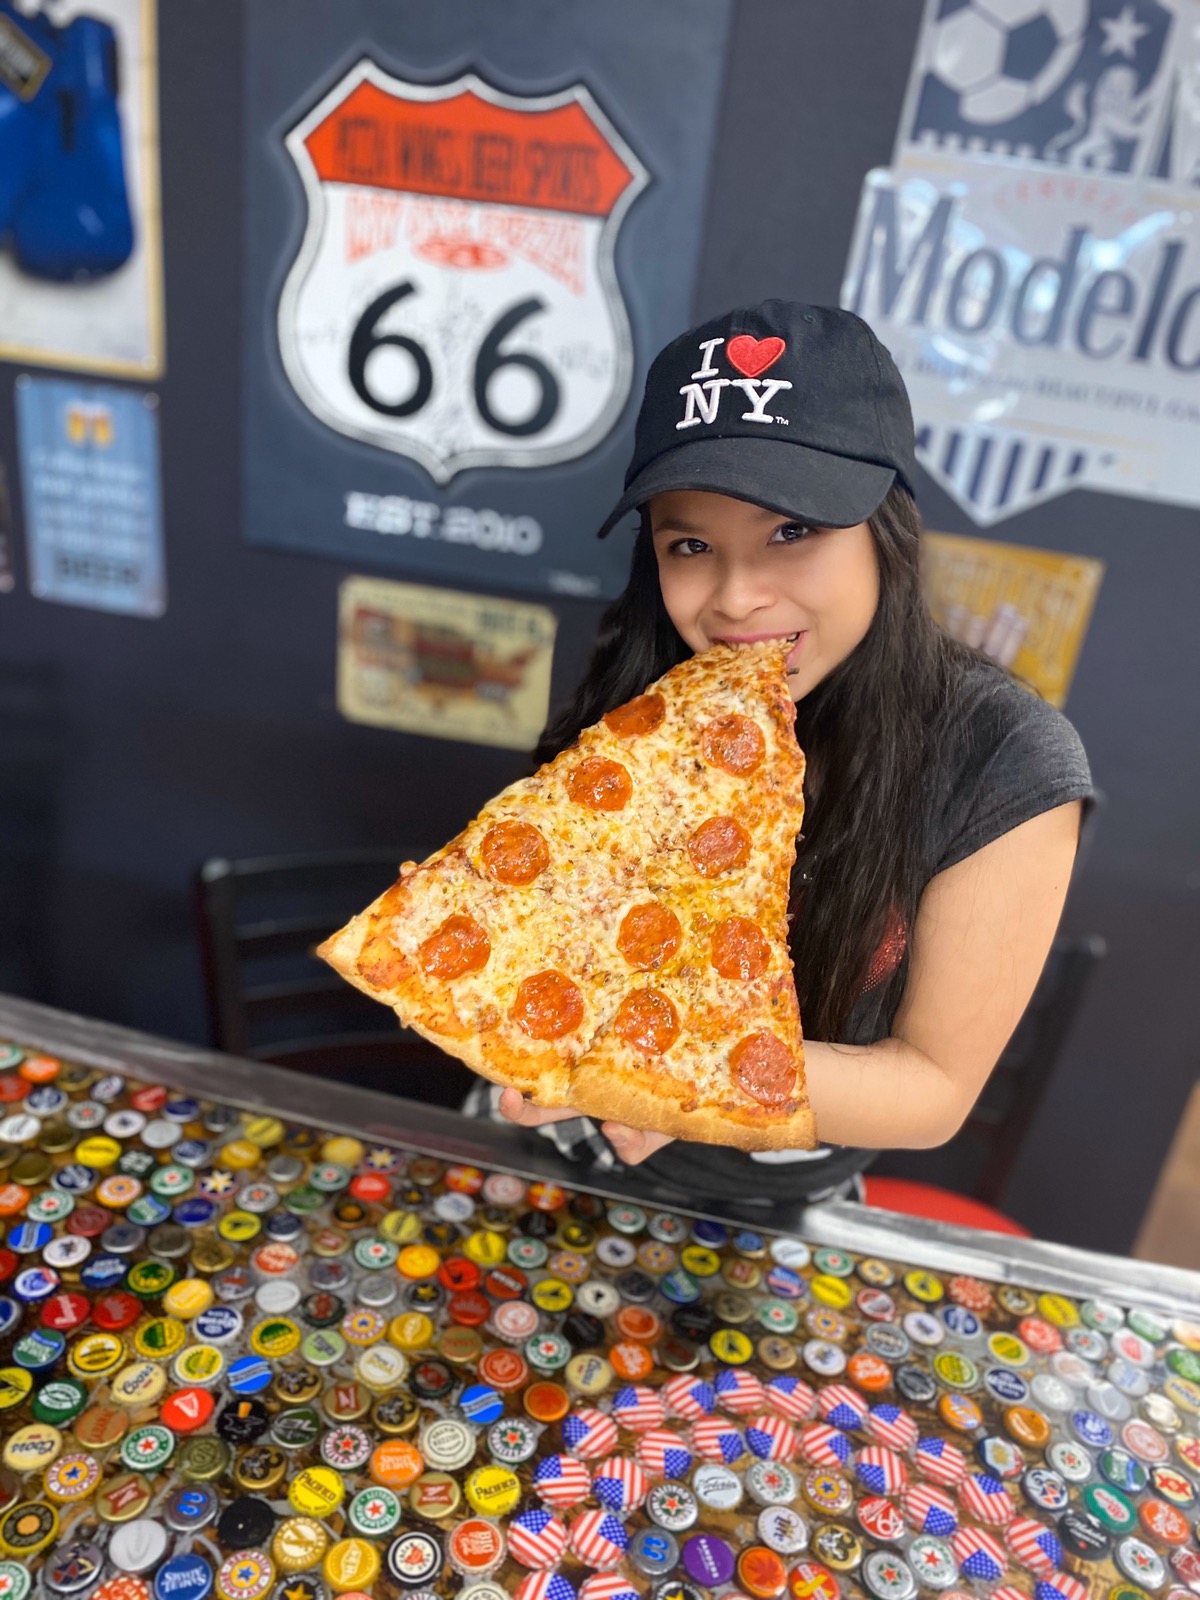 Review: A Slice of New York (Pizza)